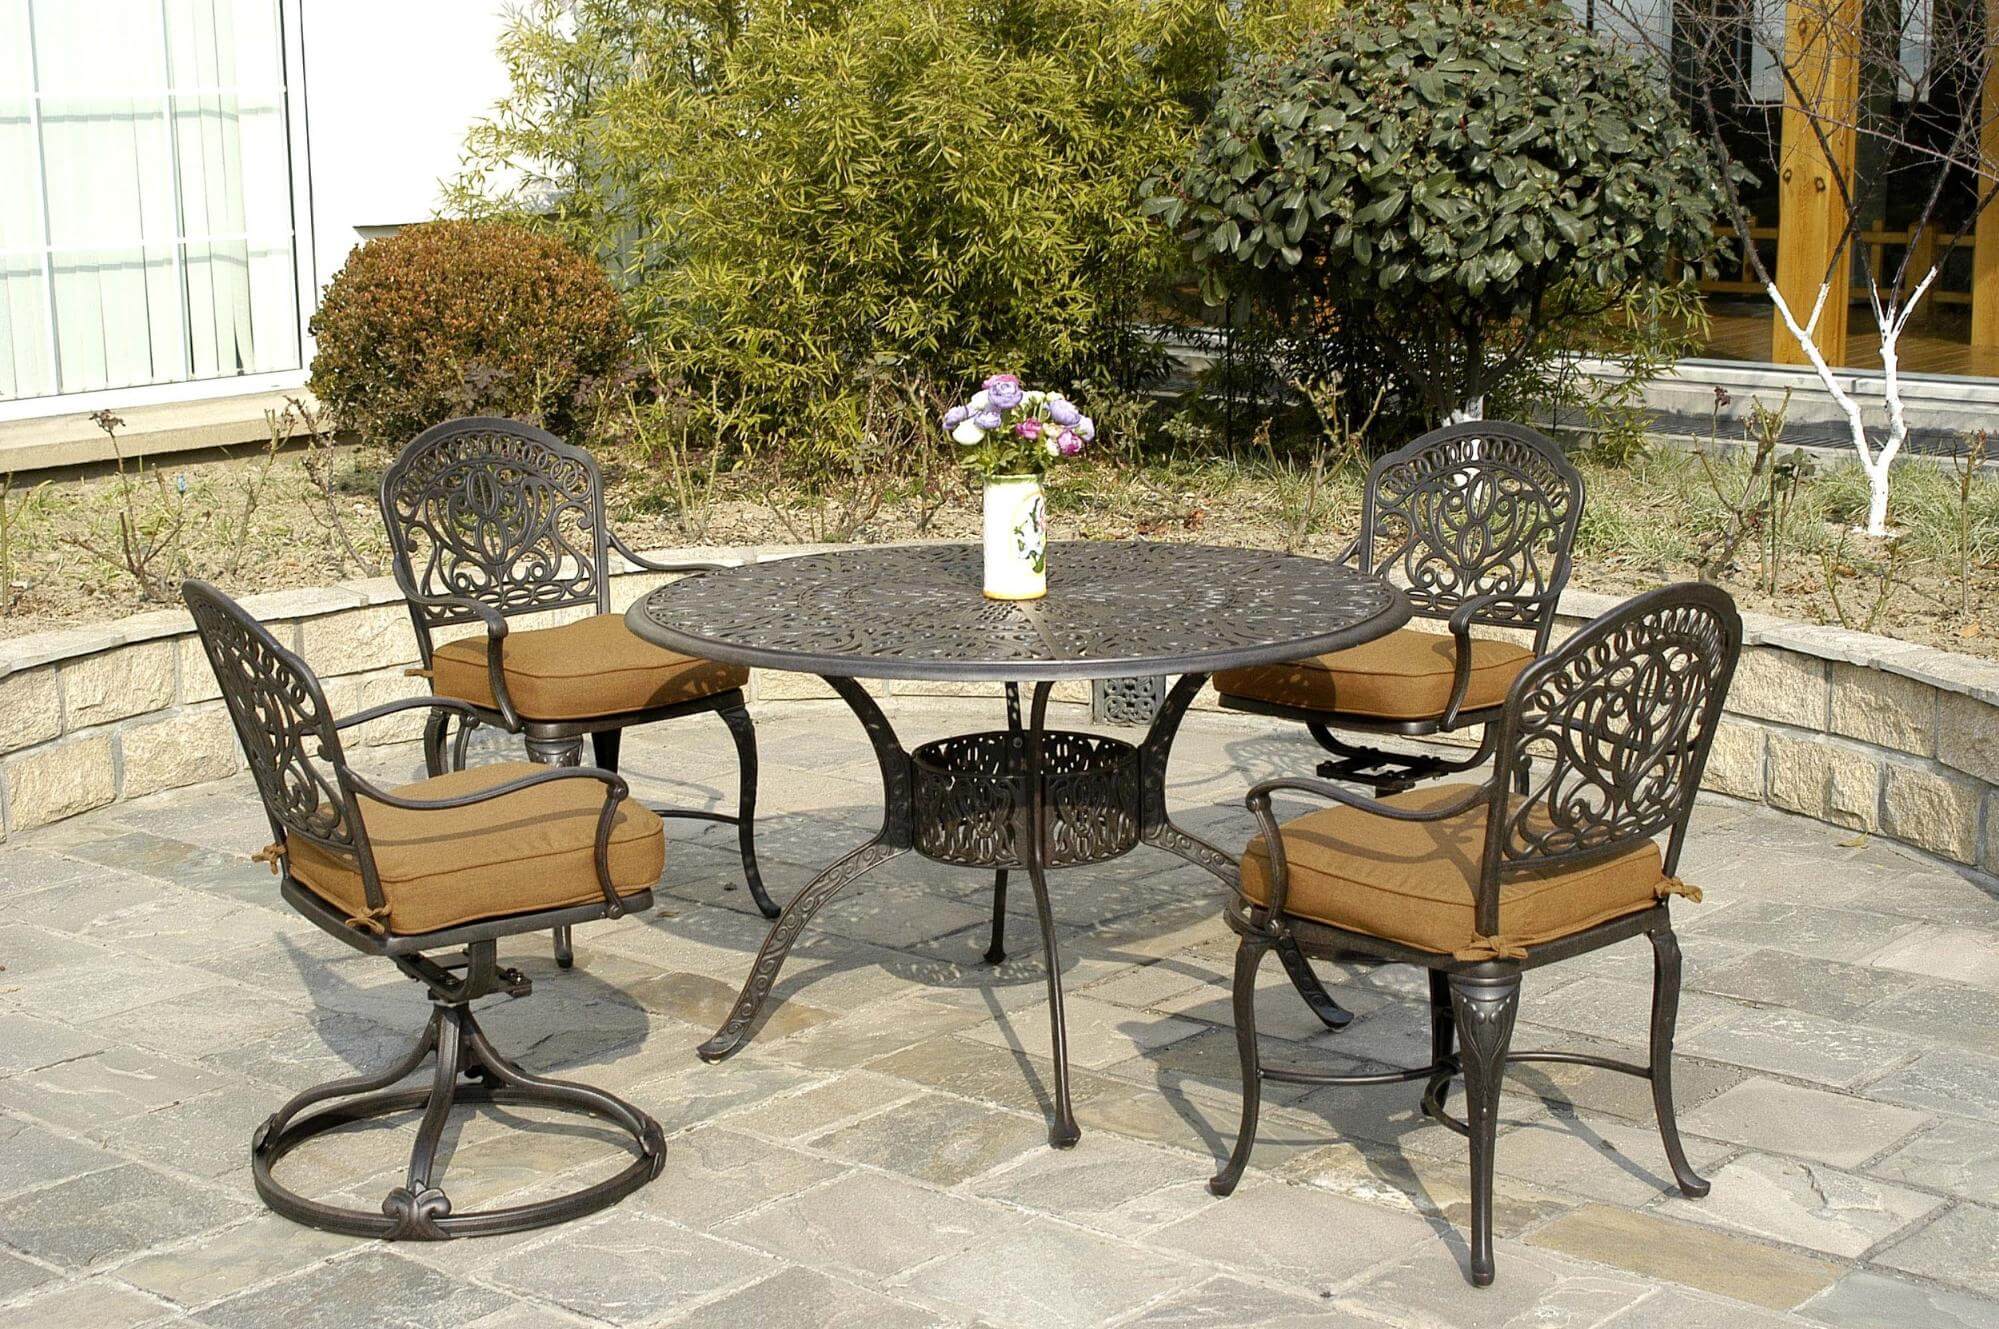 A quaint patio set fills the small space nicely without being overpowering. 